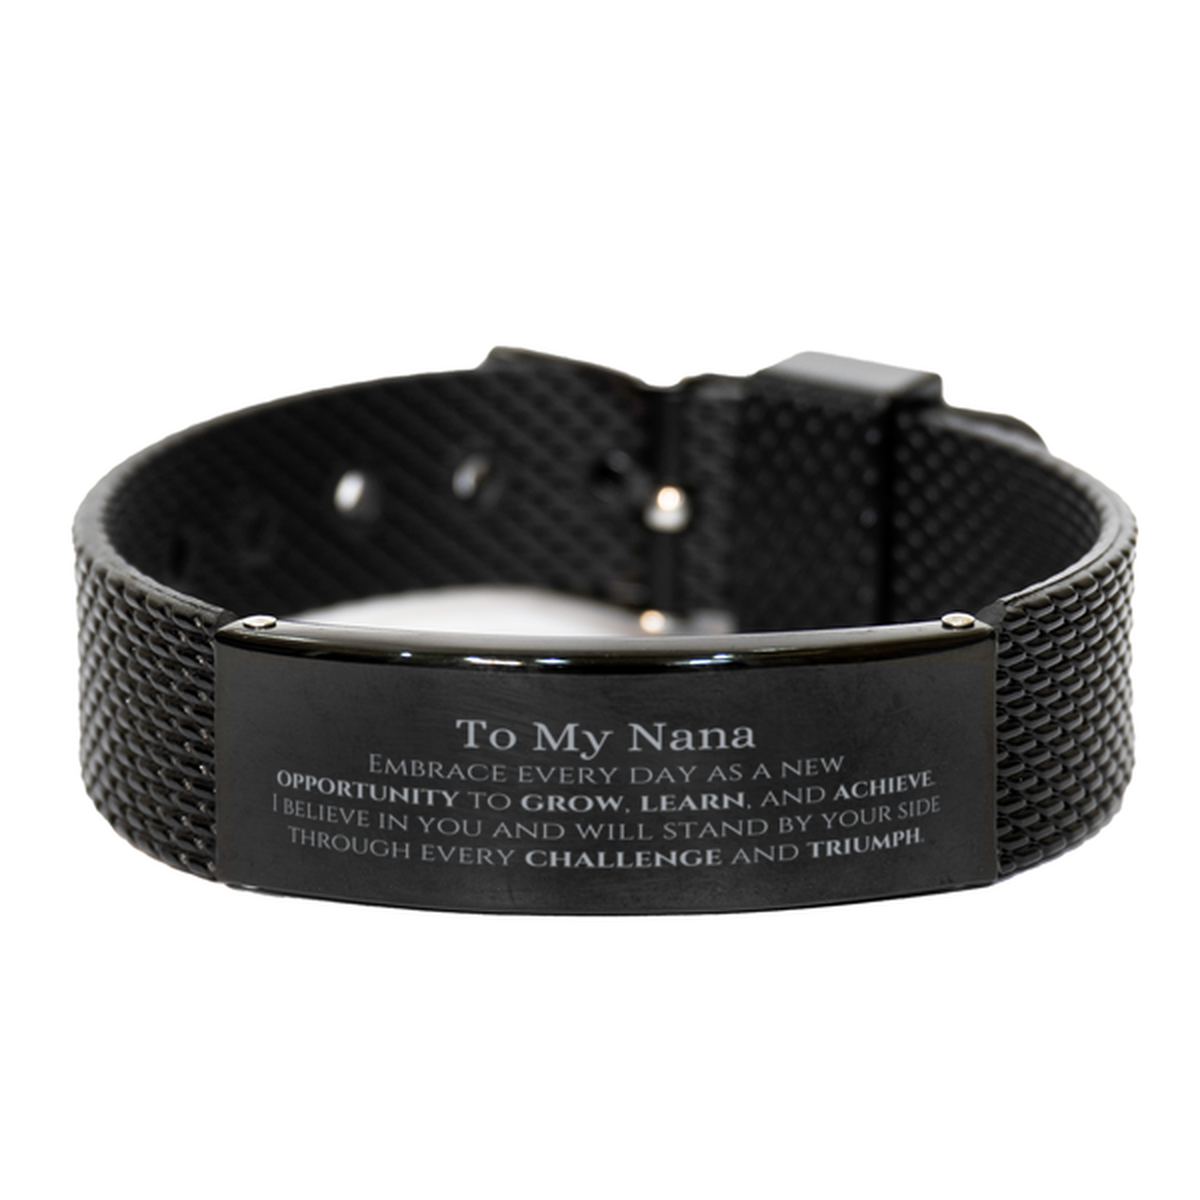 To My Nana Gifts, I believe in you and will stand by your side, Inspirational Black Shark Mesh Bracelet For Nana, Birthday Christmas Motivational Nana Gifts